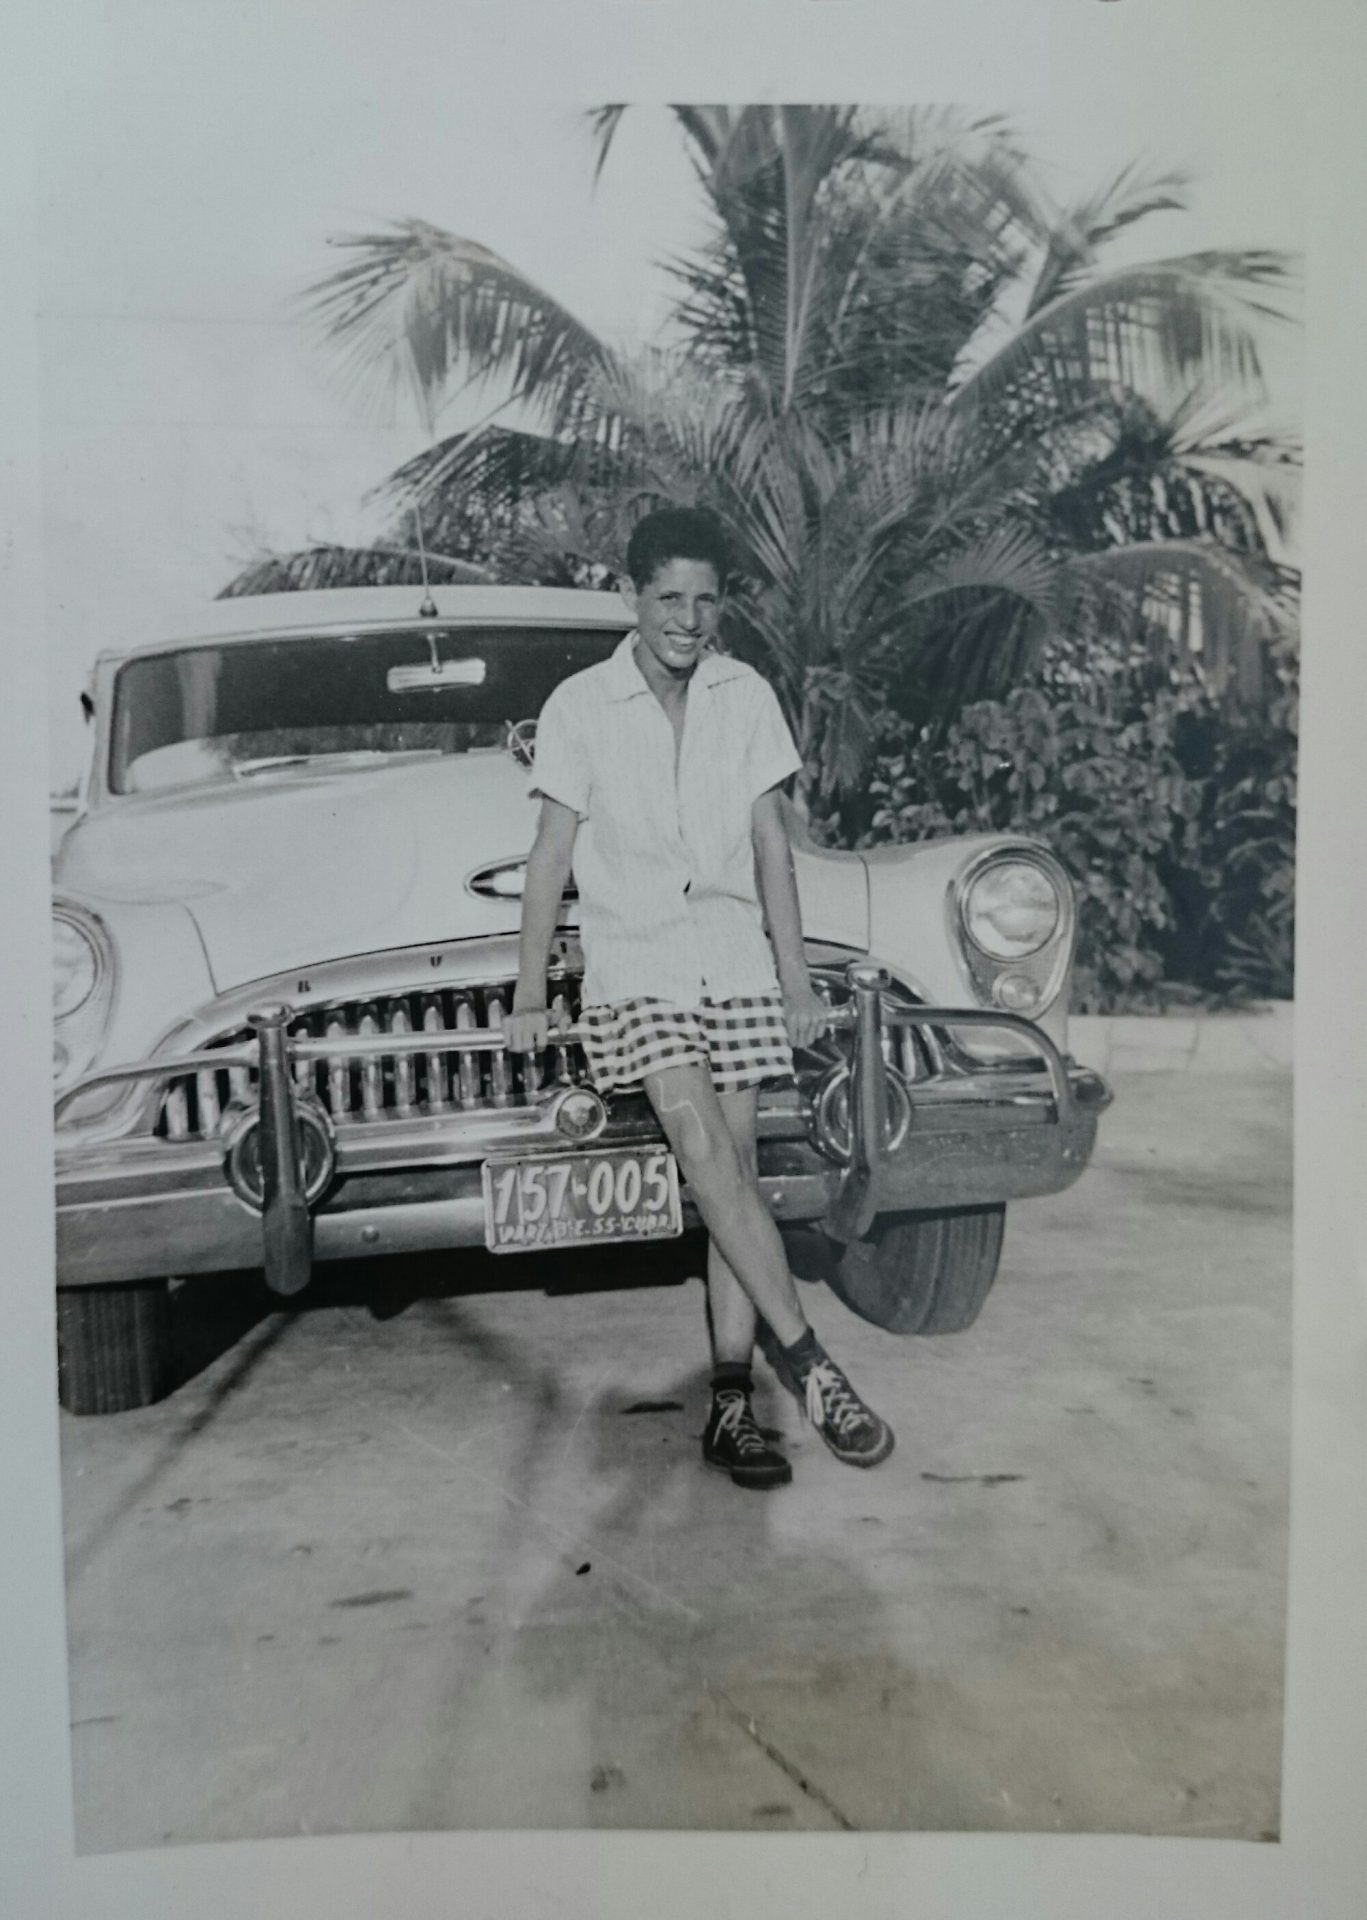 Dad in Cuba as a teenager